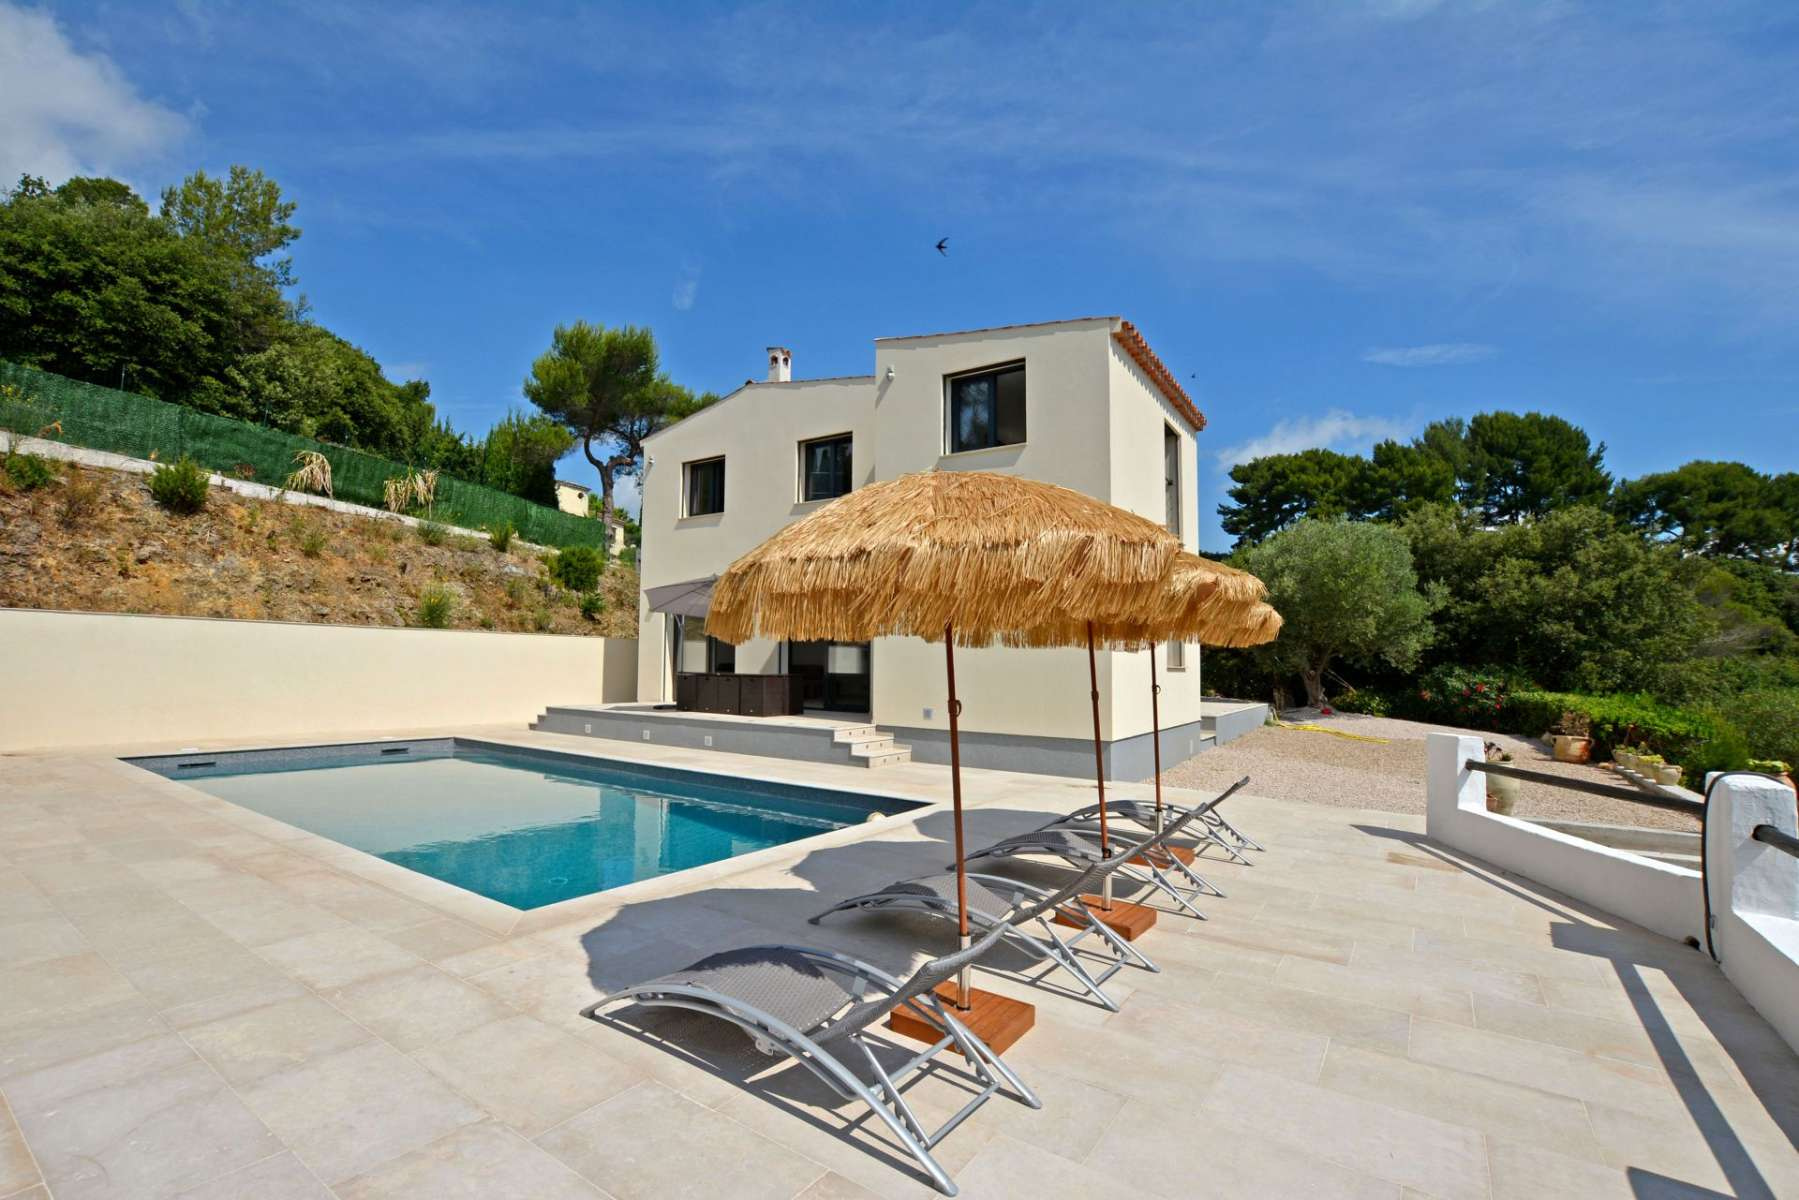 Villa for rent in gated community in Antibes